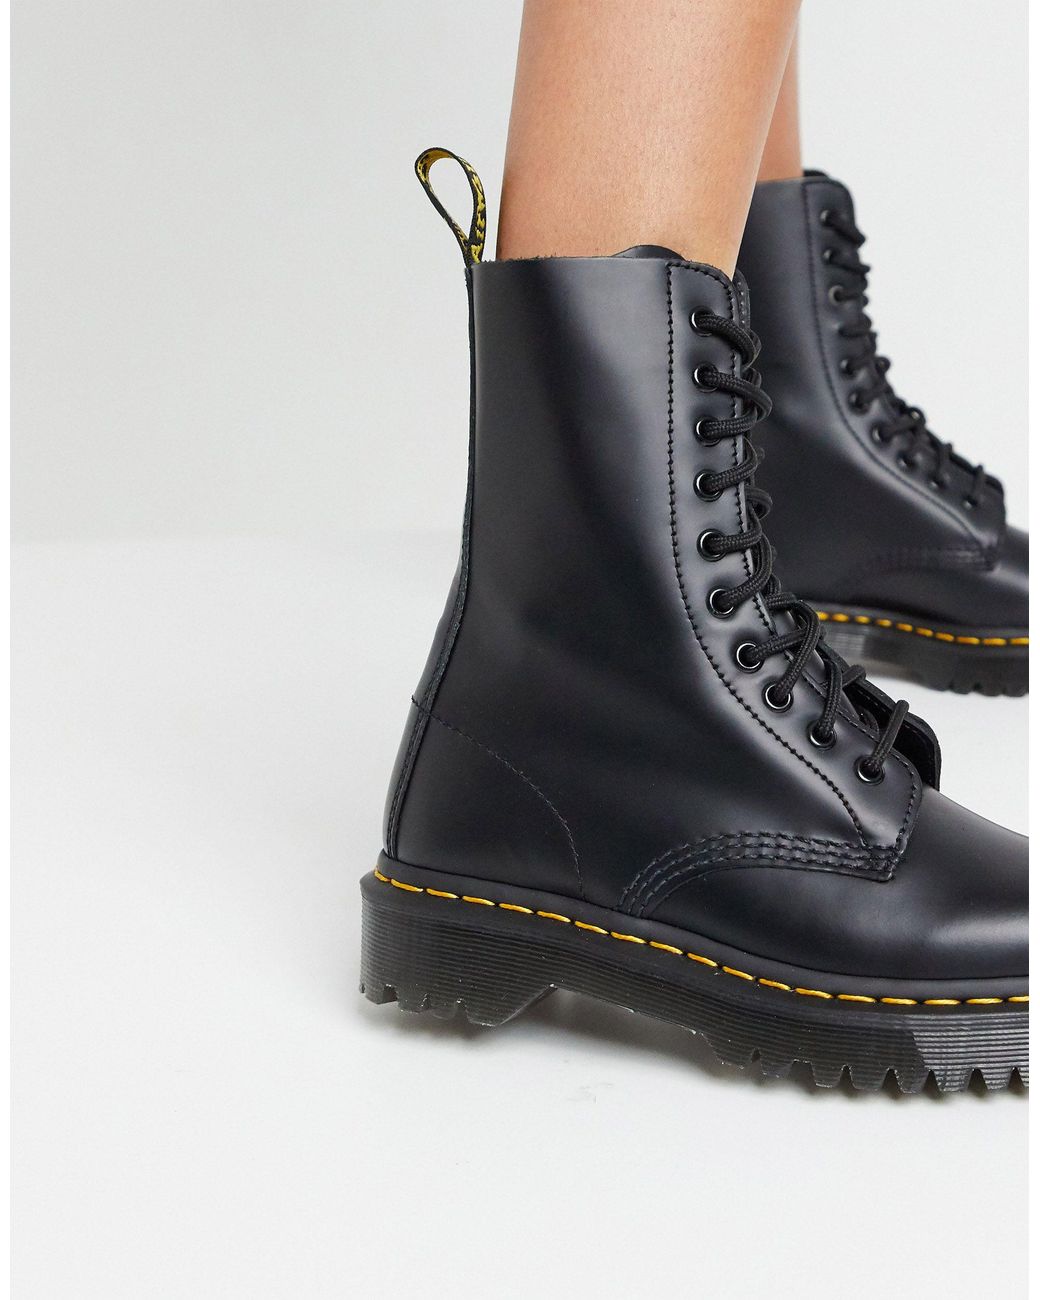 Dr. Martens Leather 1490 10 Eye Bex Boots in Black - Save 17% | Lyst